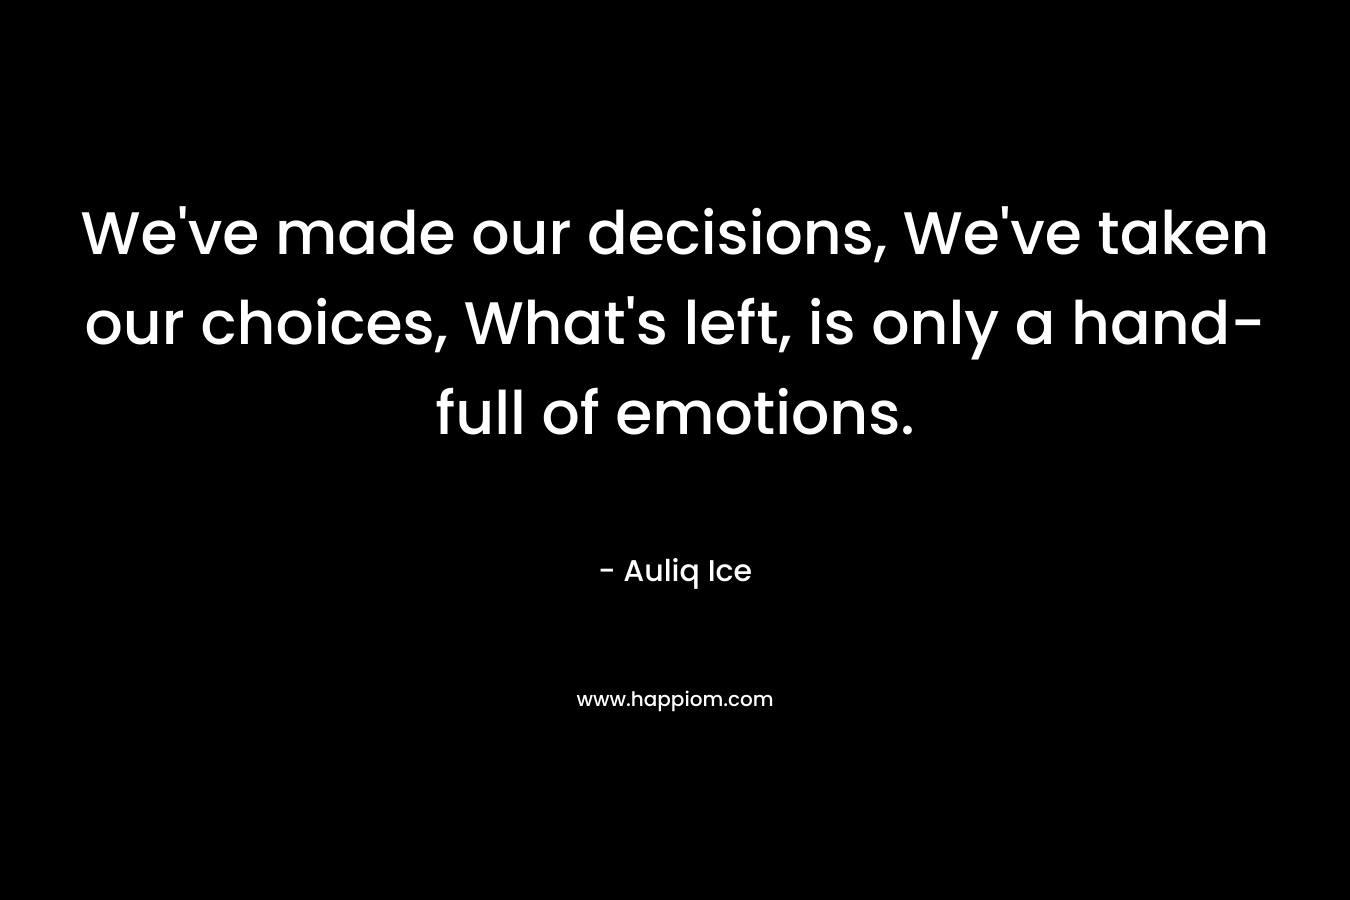 We've made our decisions, We've taken our choices, What's left, is only a hand-full of emotions.